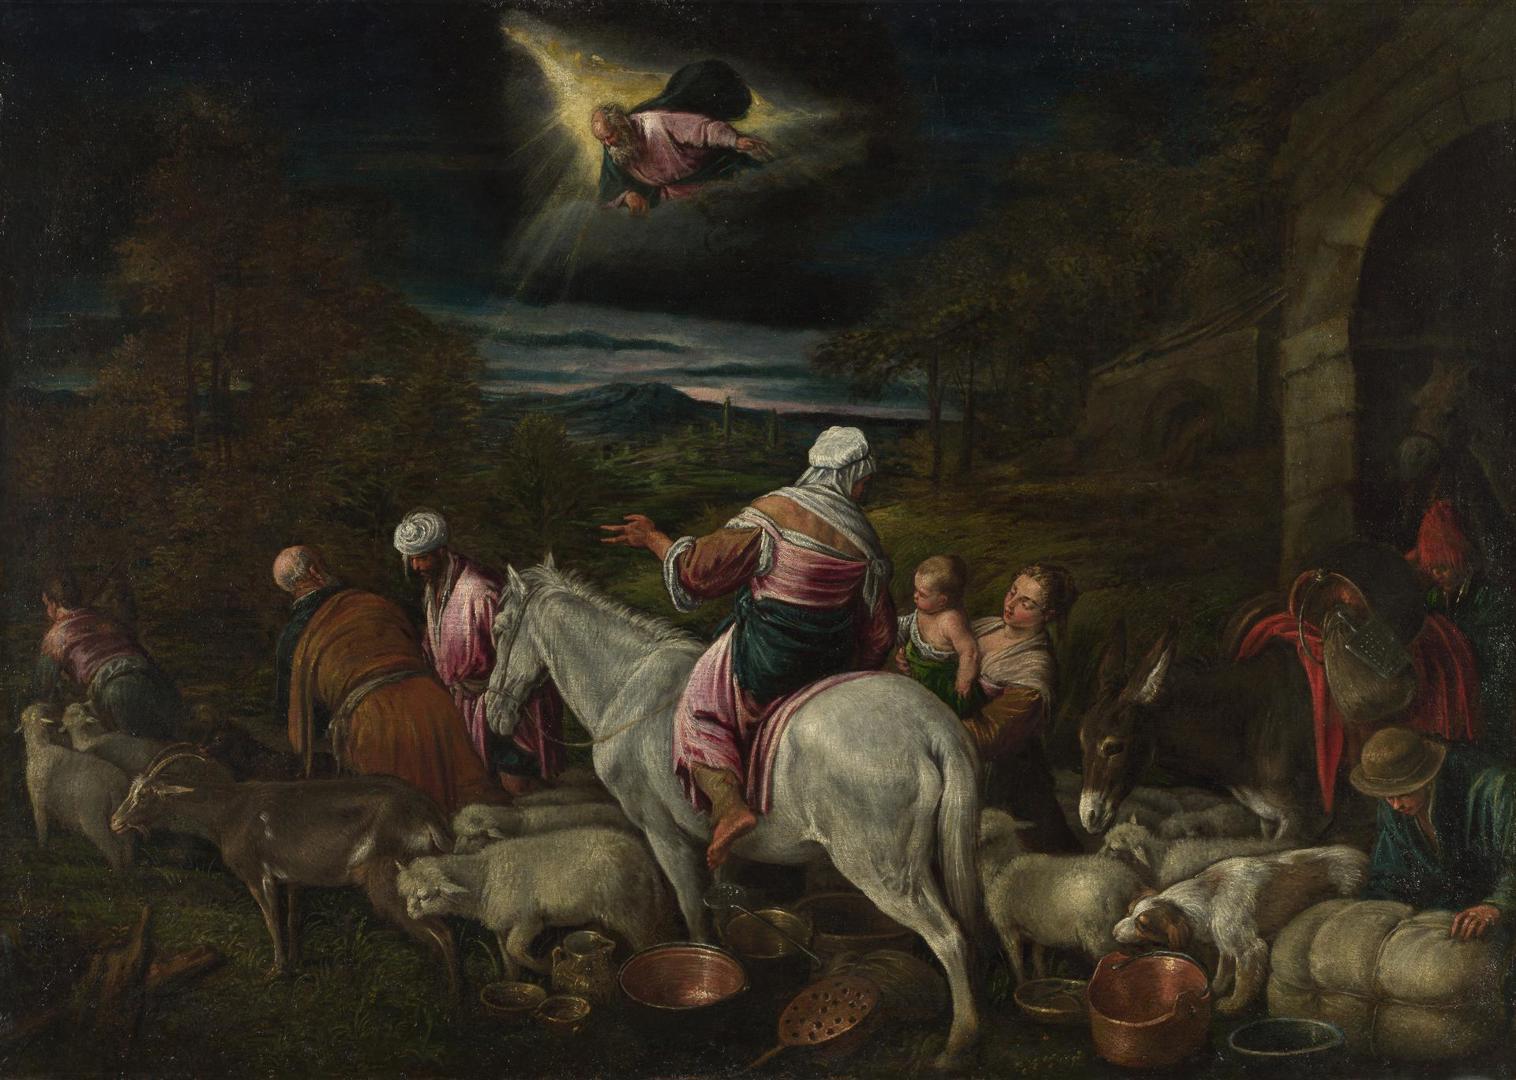 The Departure of Abraham by Workshop or imitator of Jacopo Bassano